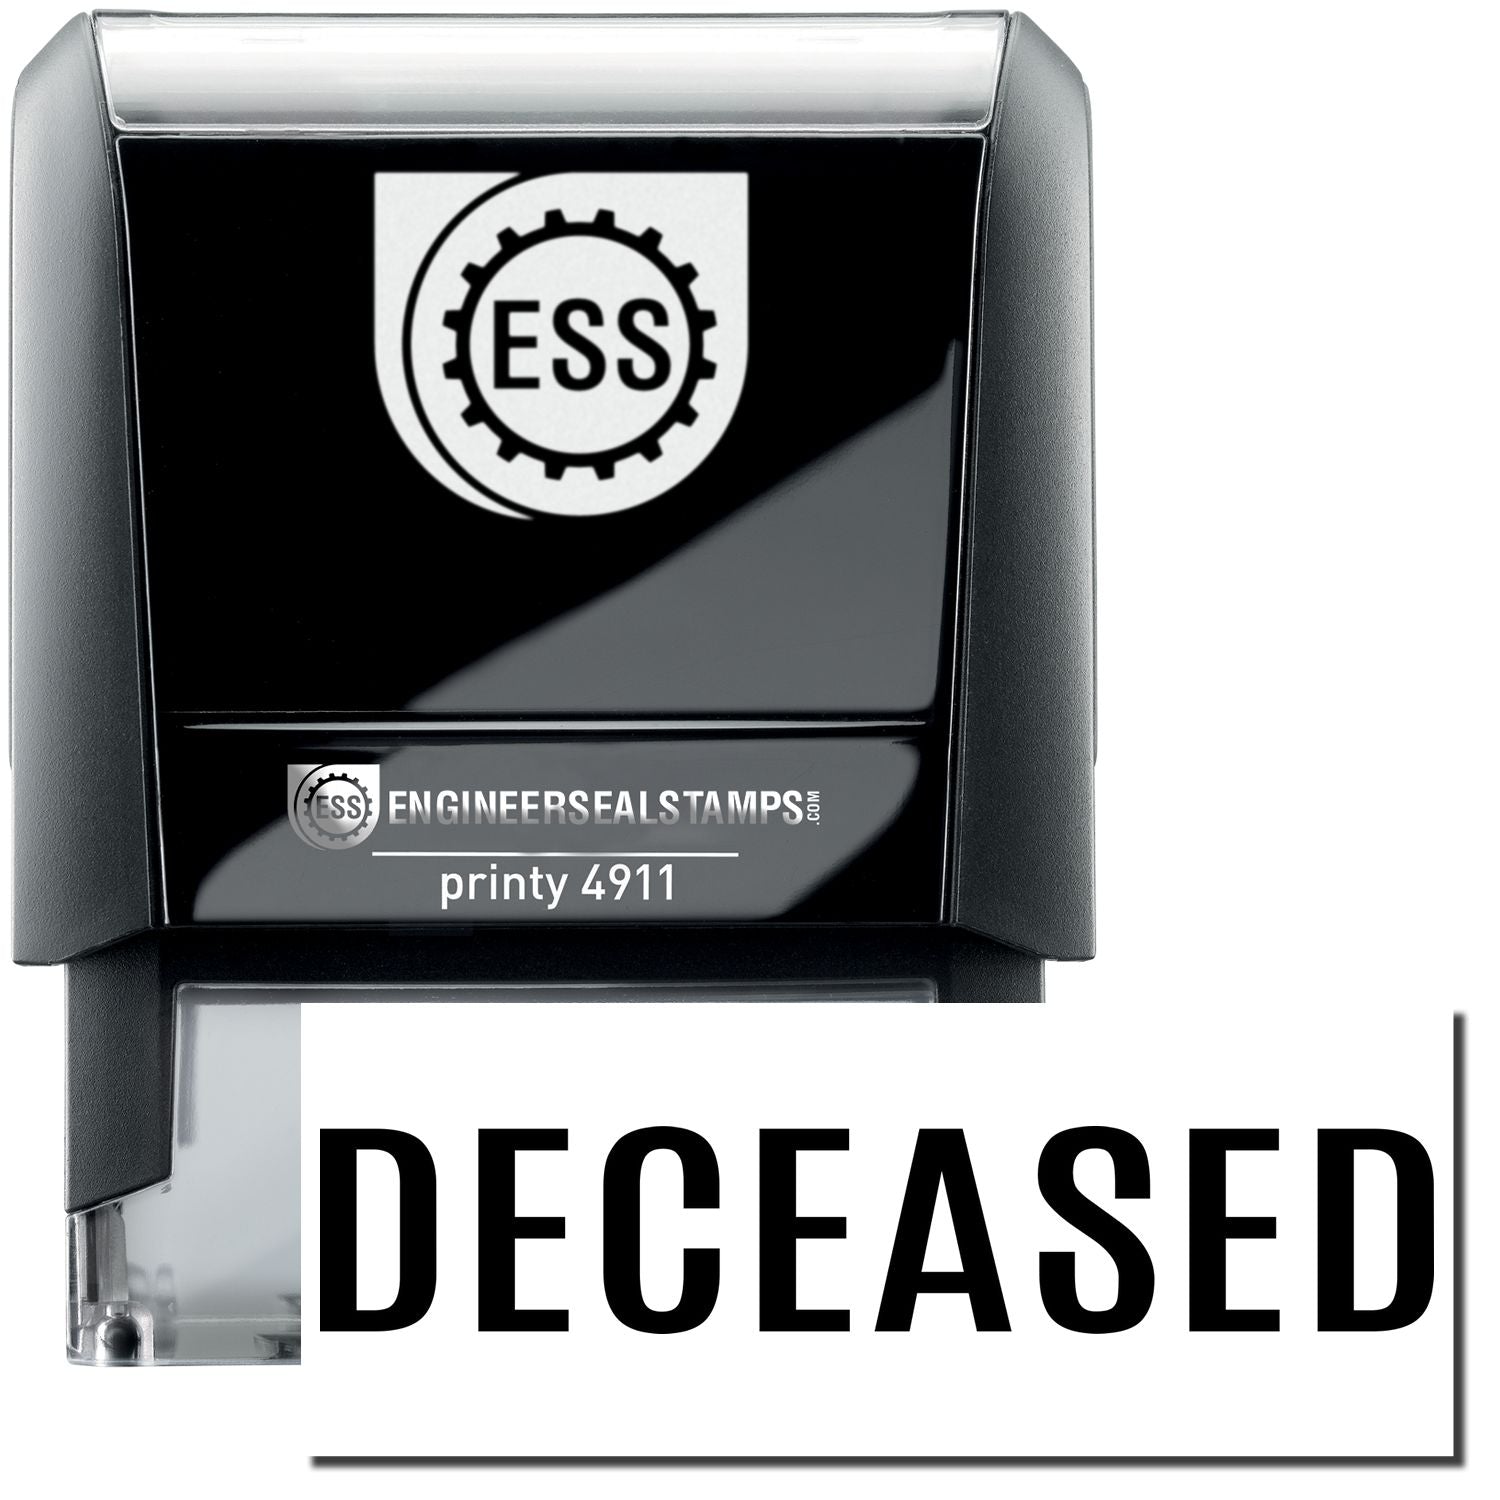 A self-inking stamp with a stamped image showing how the text "DECEASED" in bold font is displayed after stamping.